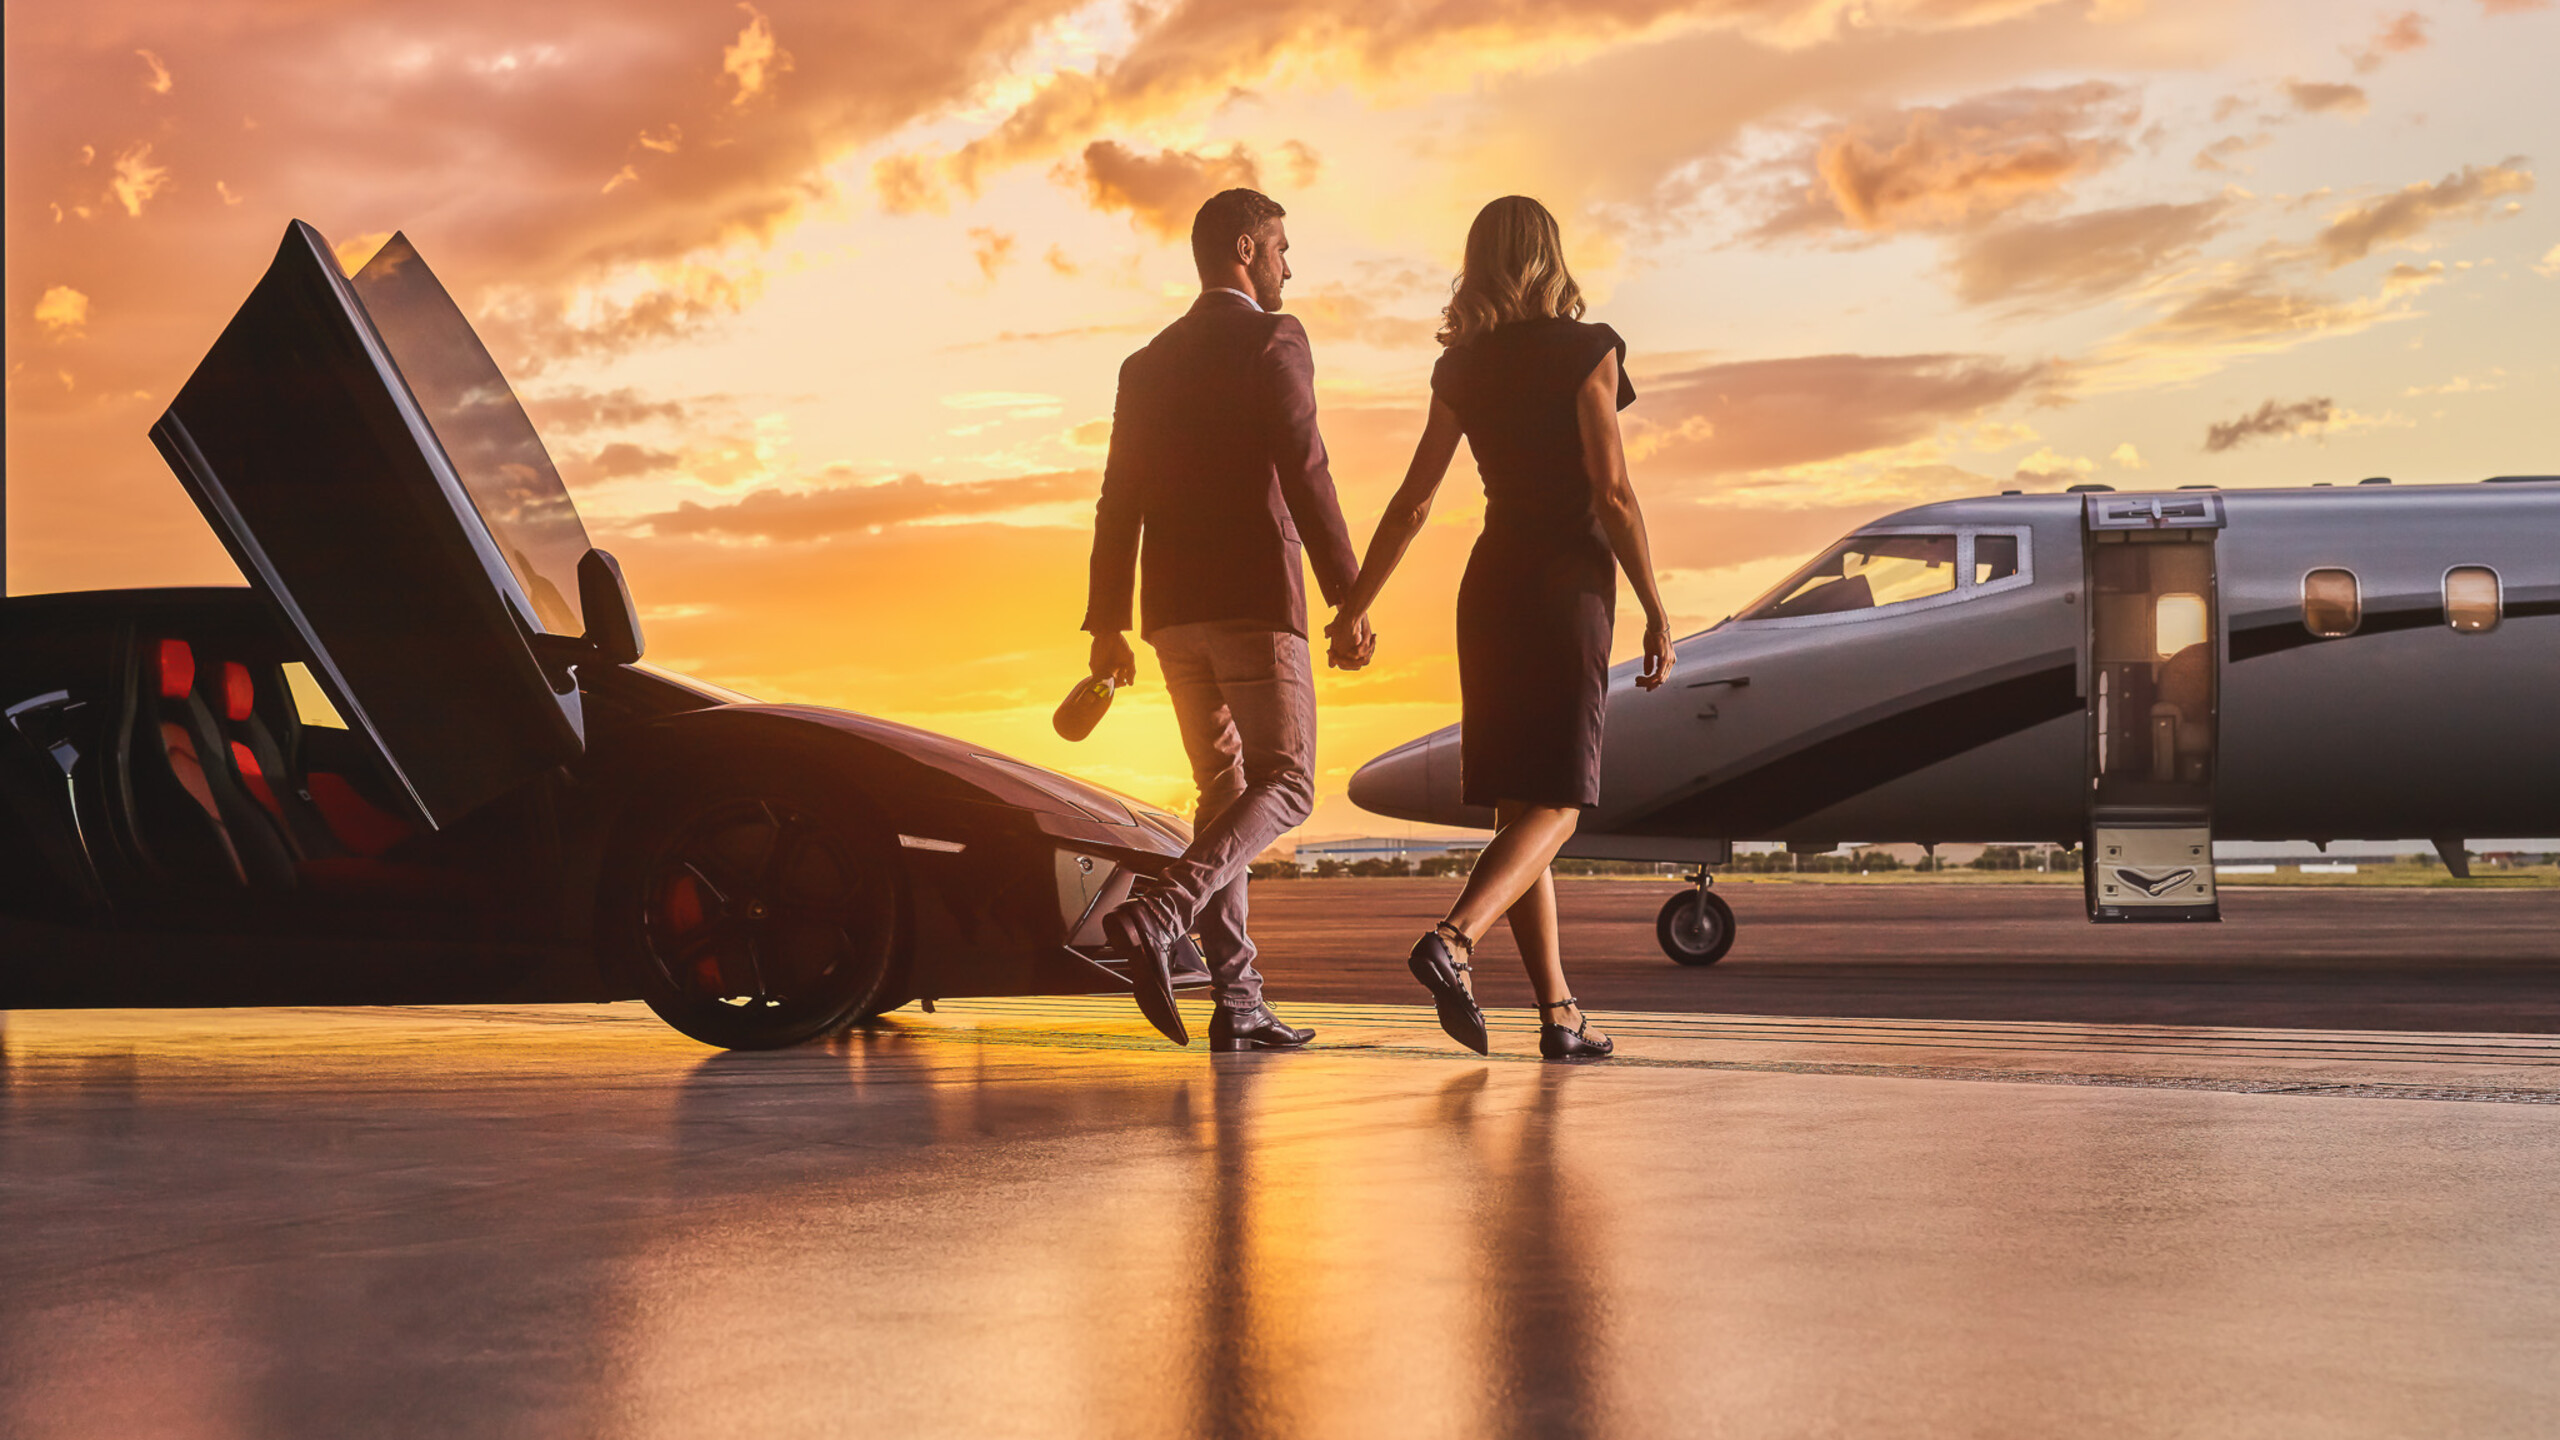 THE PERFECT PRIVATE JET FOR YOUR NEXT TRIP